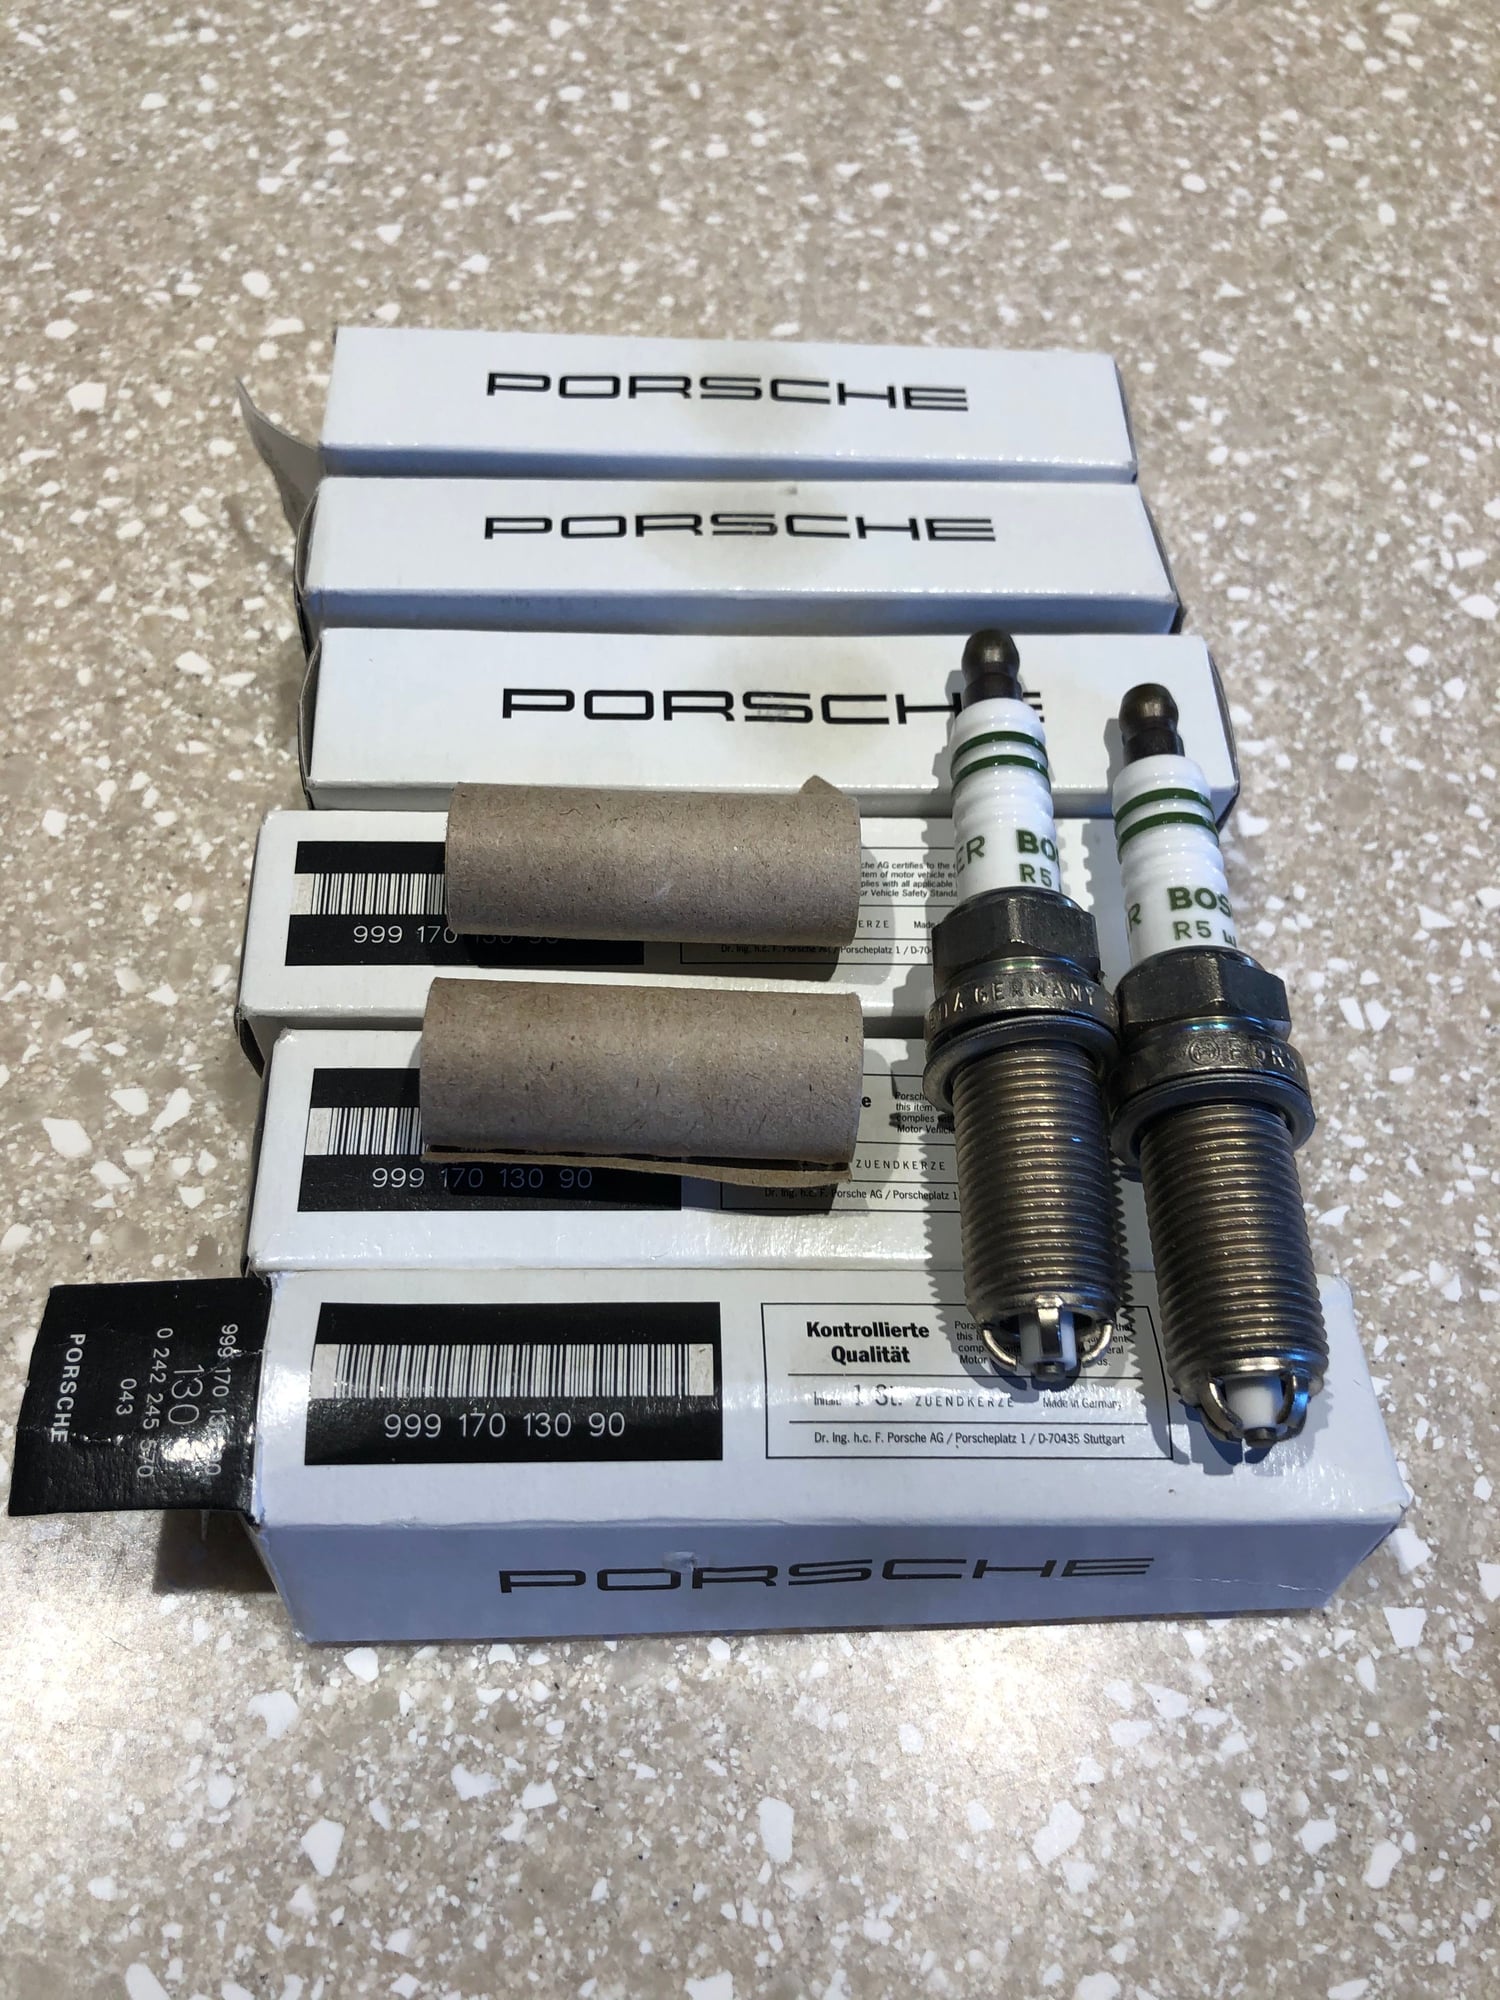 Engine - Electrical - 6 new Porsche spark plugs p/n 999 170 130 90. - New - 2014 to 2016 Porsche Panamera - 2012 to 2014 Porsche Panamera - 2013 to 2014 Porsche Cayenne - St. Charles, IL 60175, United States